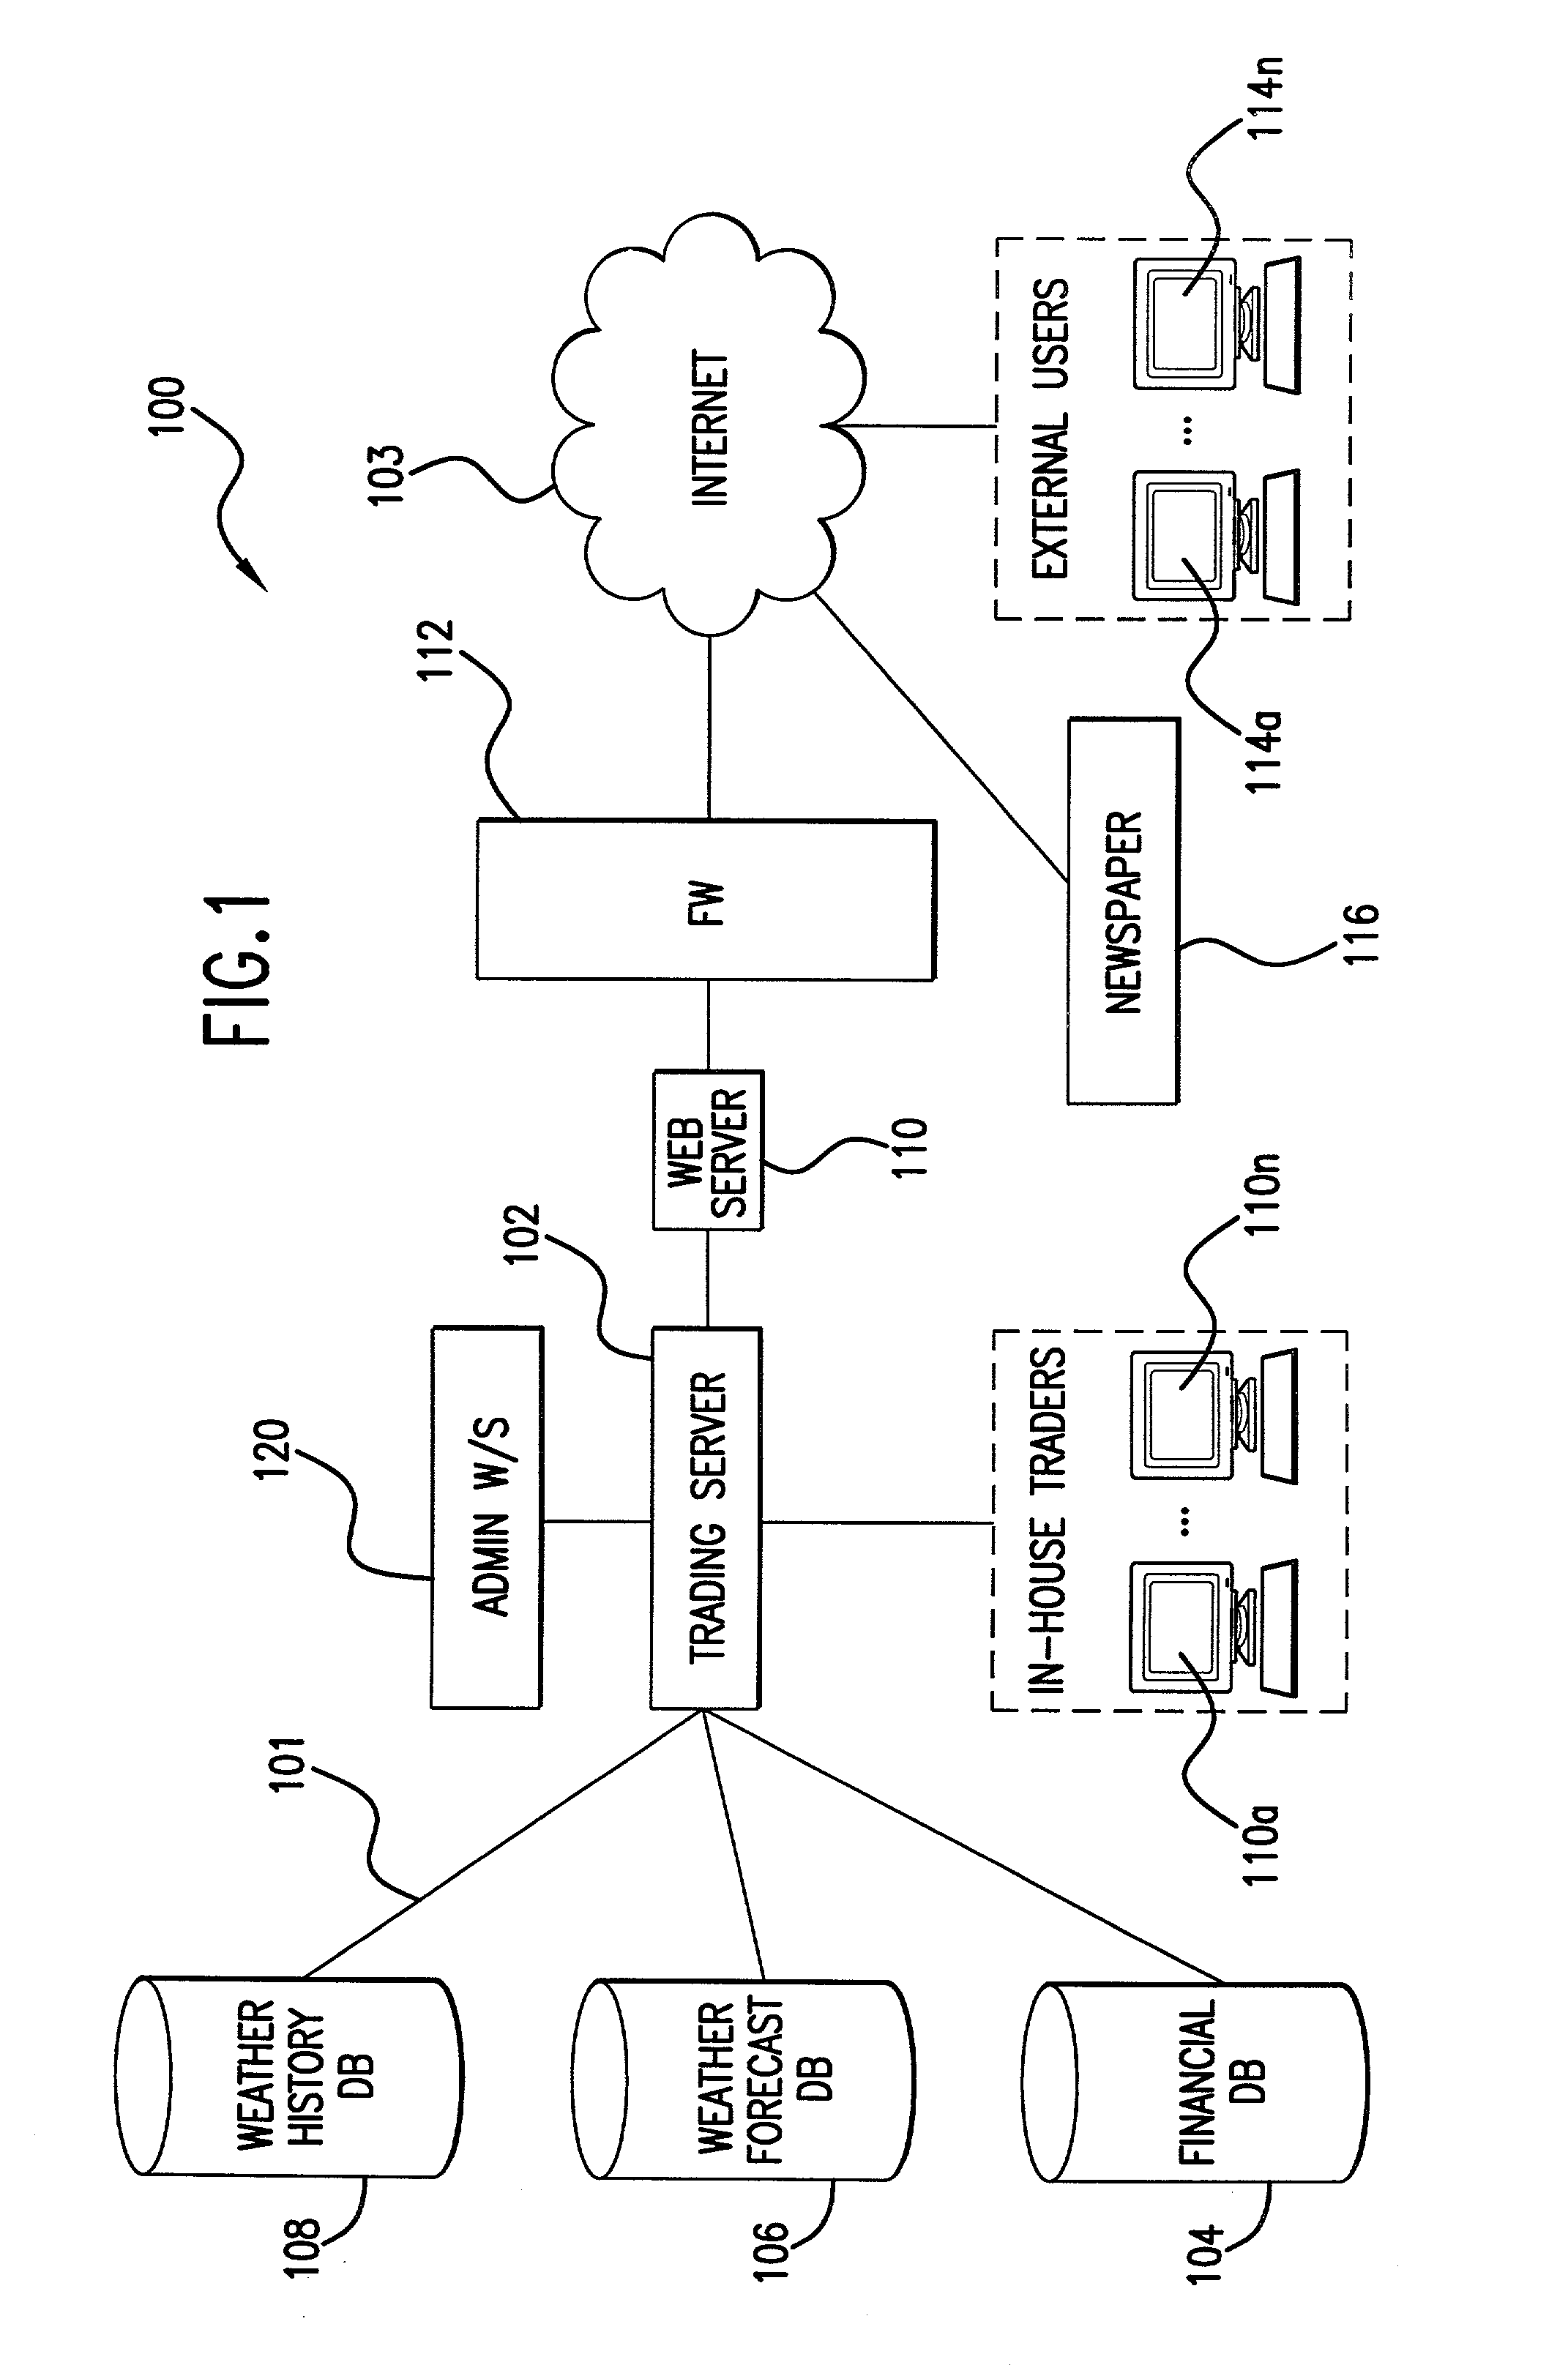 System, method, and computer program product for valuating wather-based financial instruments